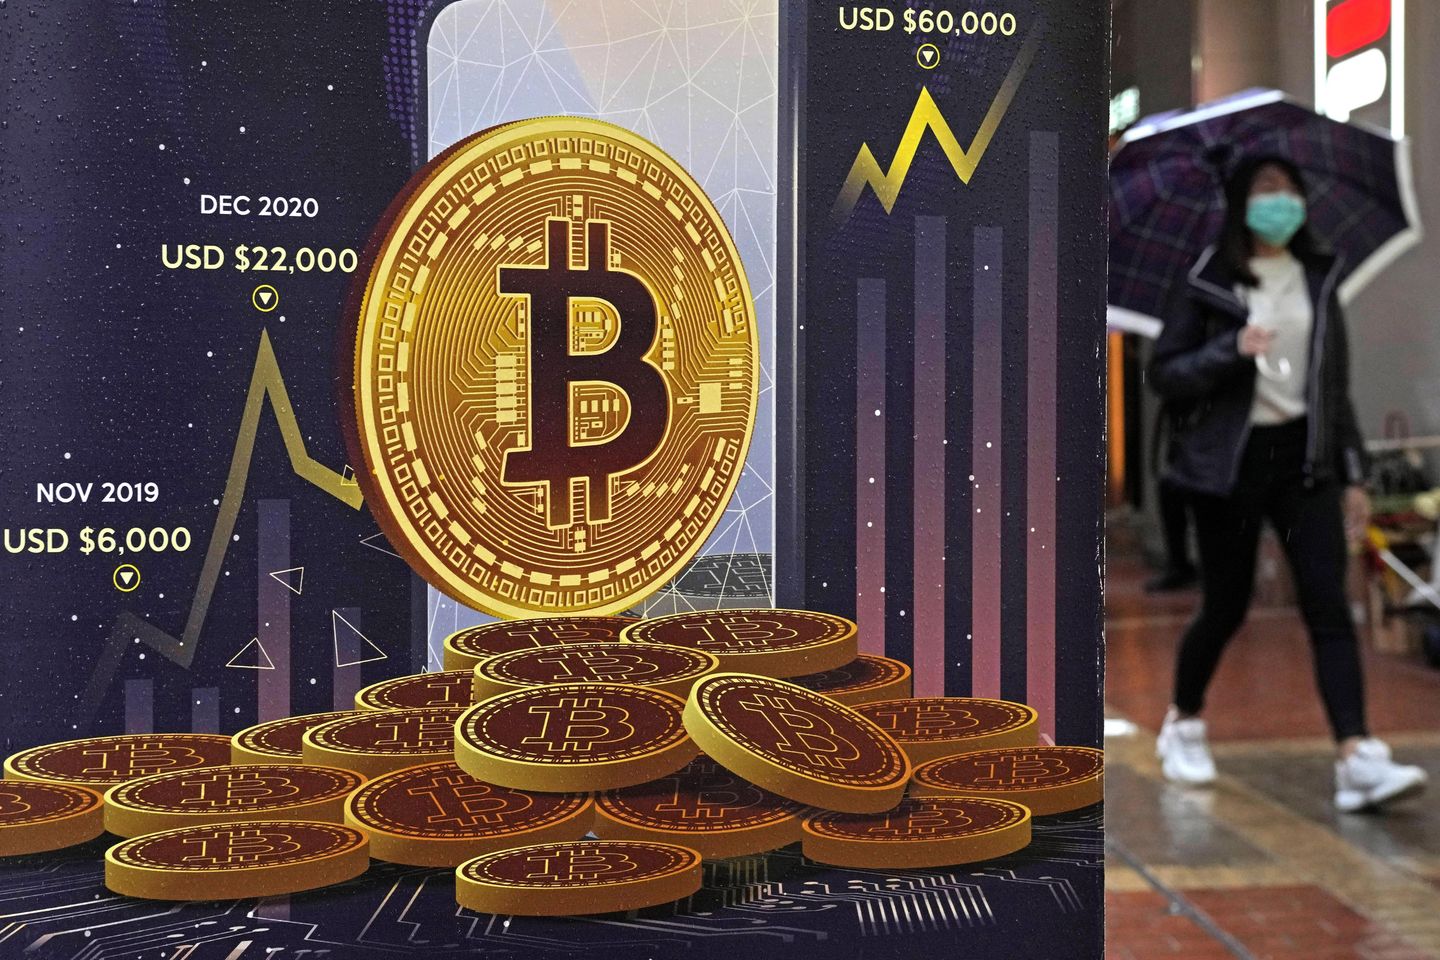 Bitcoin tumbles, a stablecoin plunges in wild week in crypto